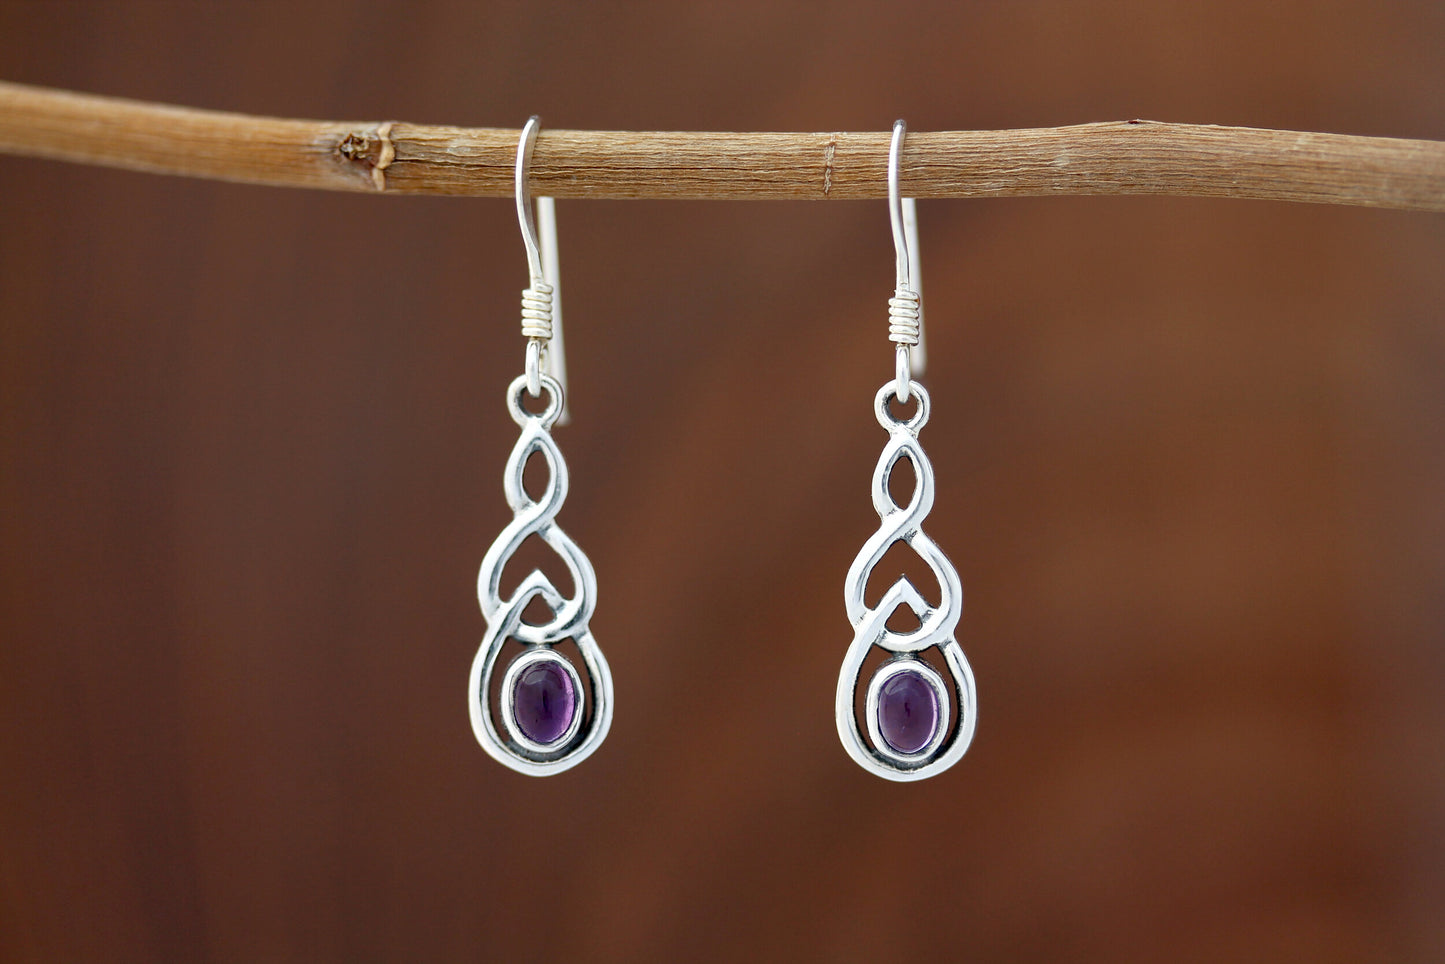 Celtic Knot Earrings - Interlocked Arms with Amethyst